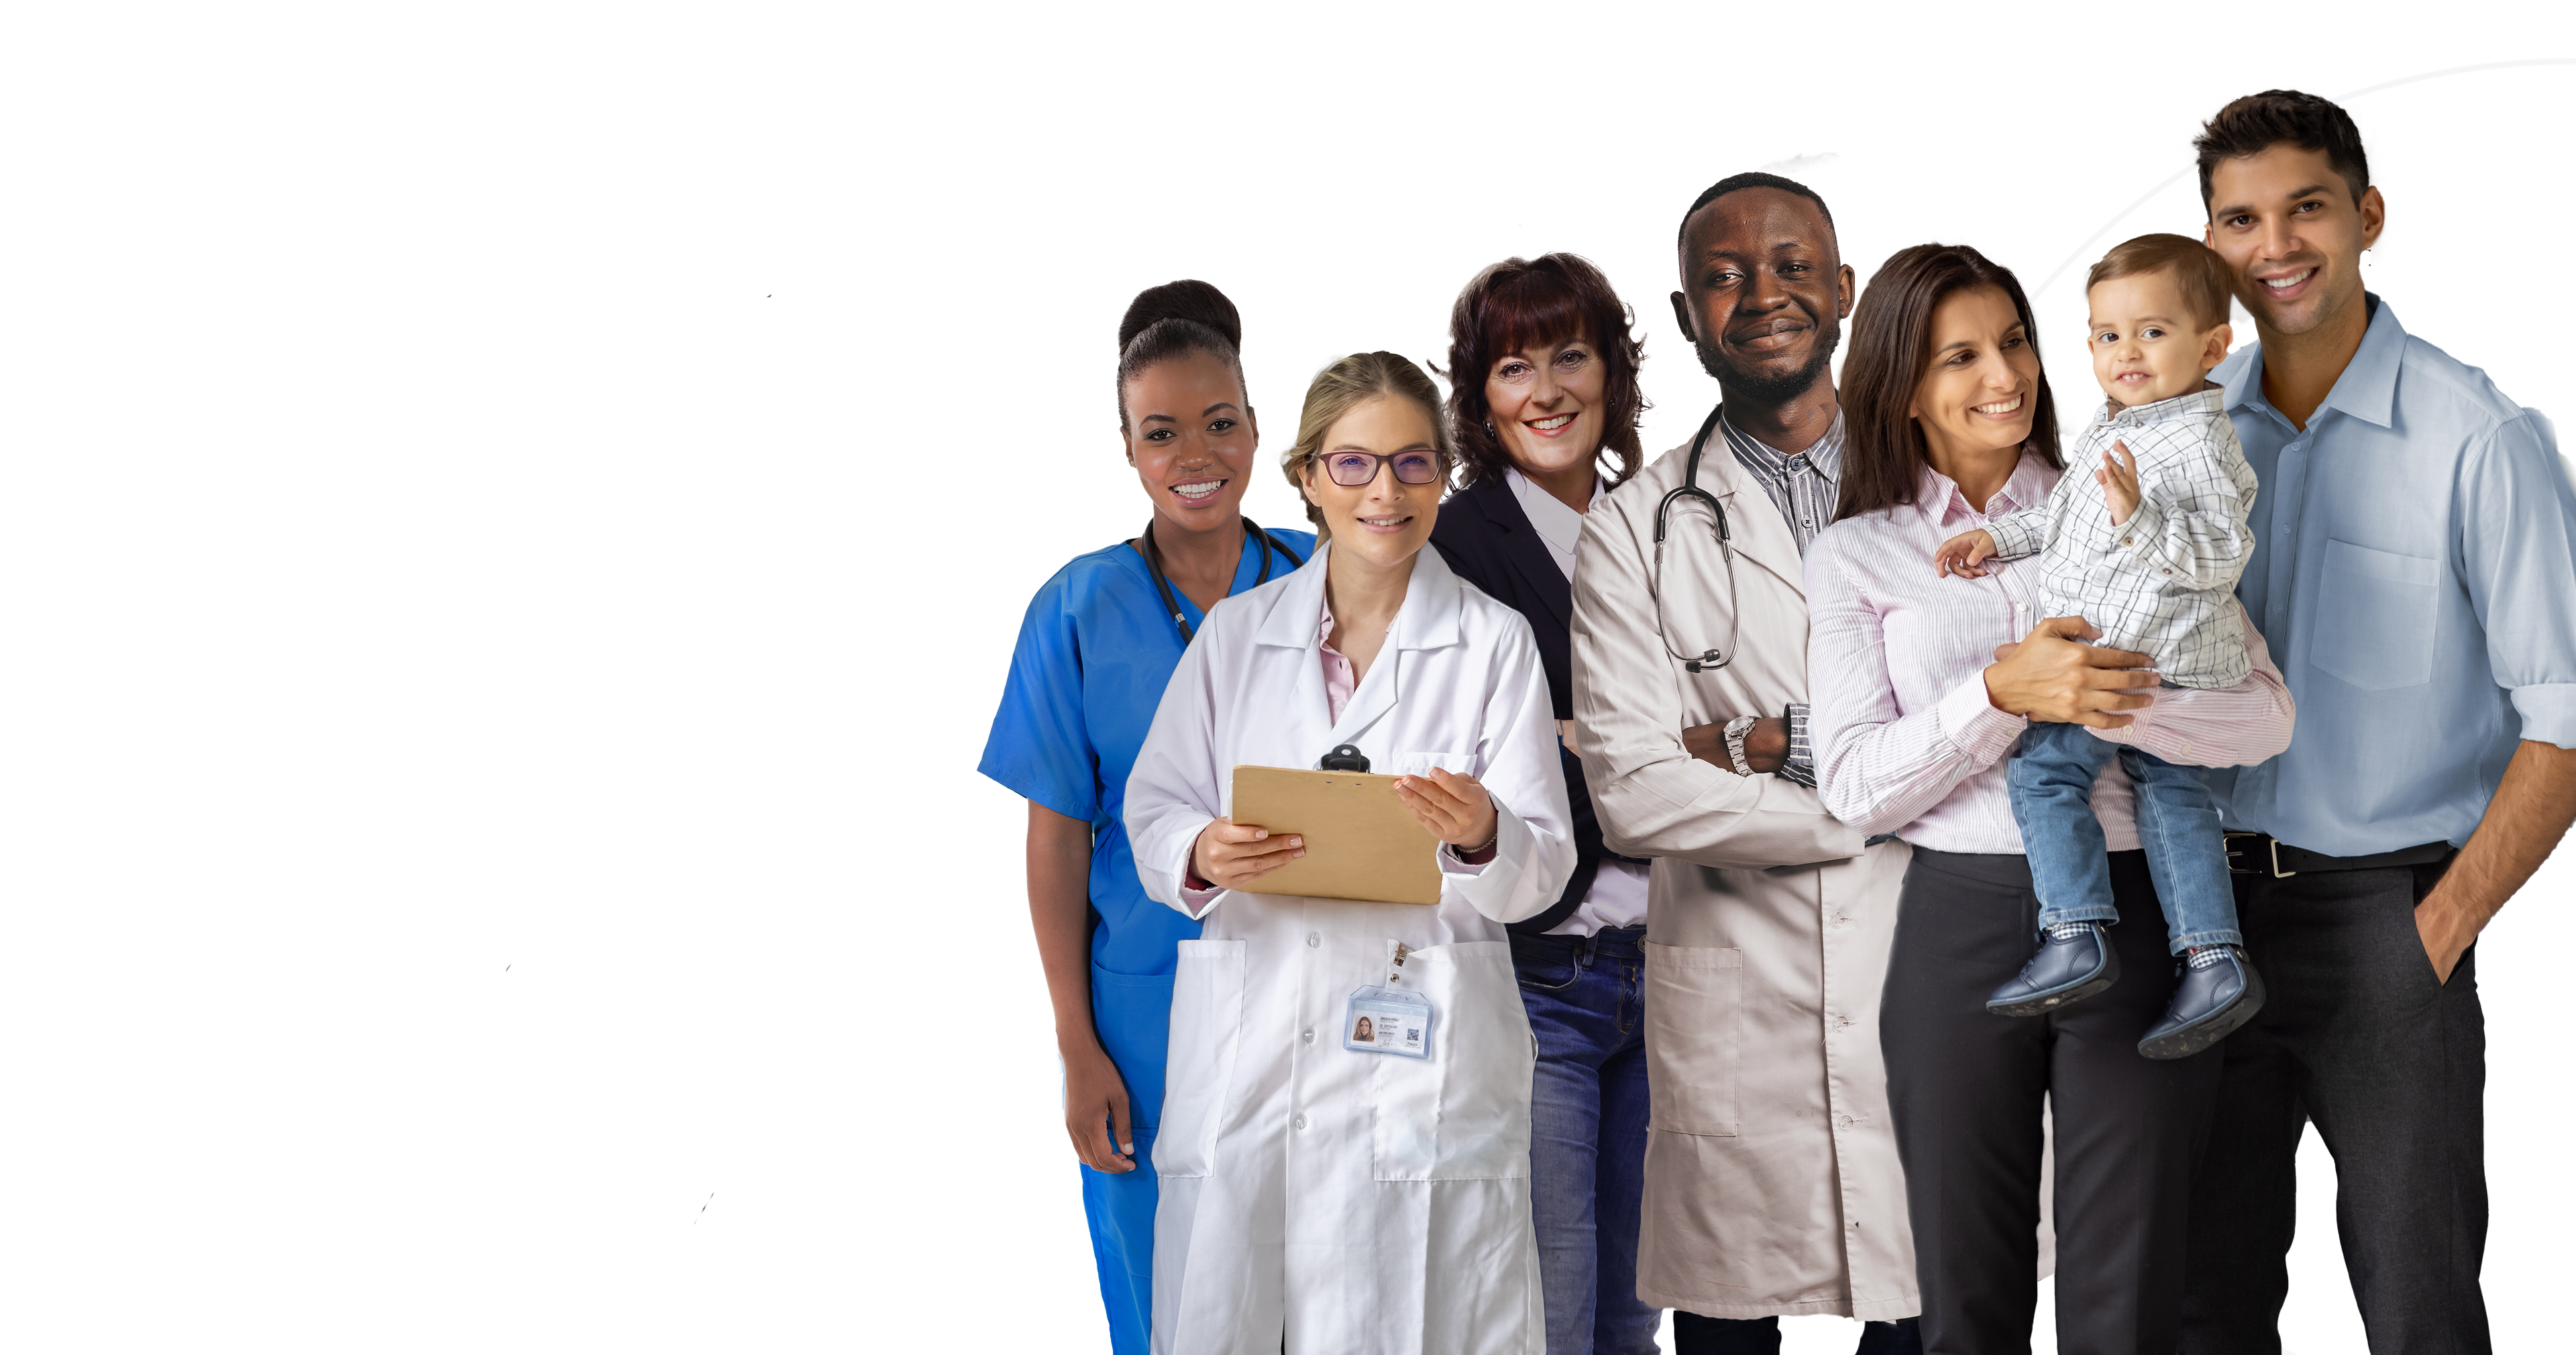 Group of Health professionals